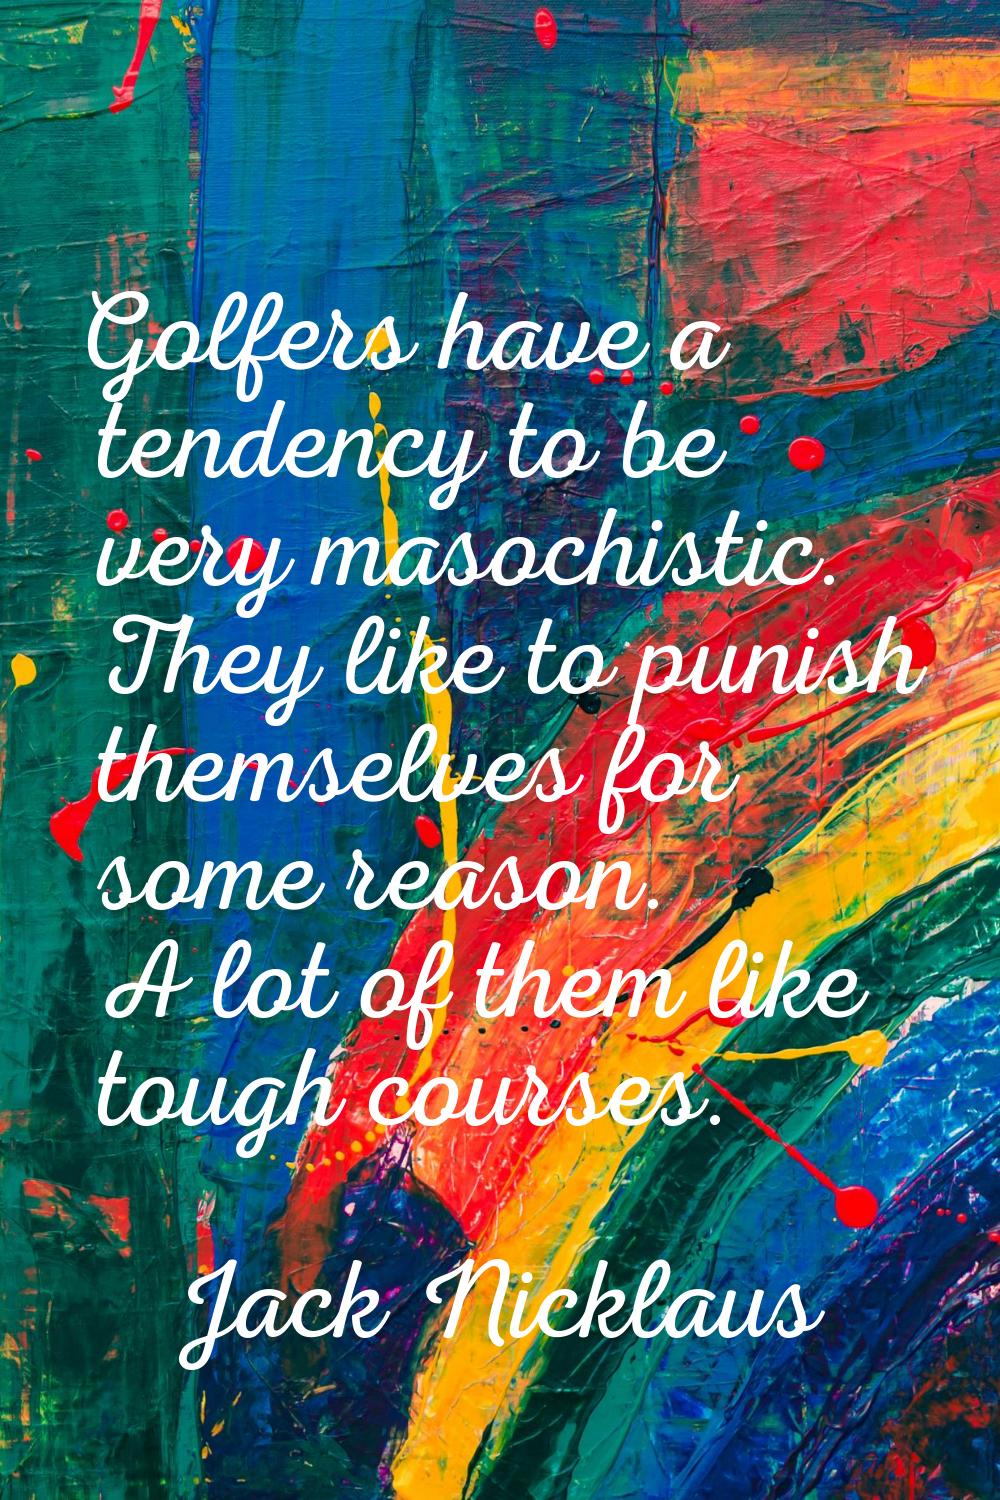 Golfers have a tendency to be very masochistic. They like to punish themselves for some reason. A l